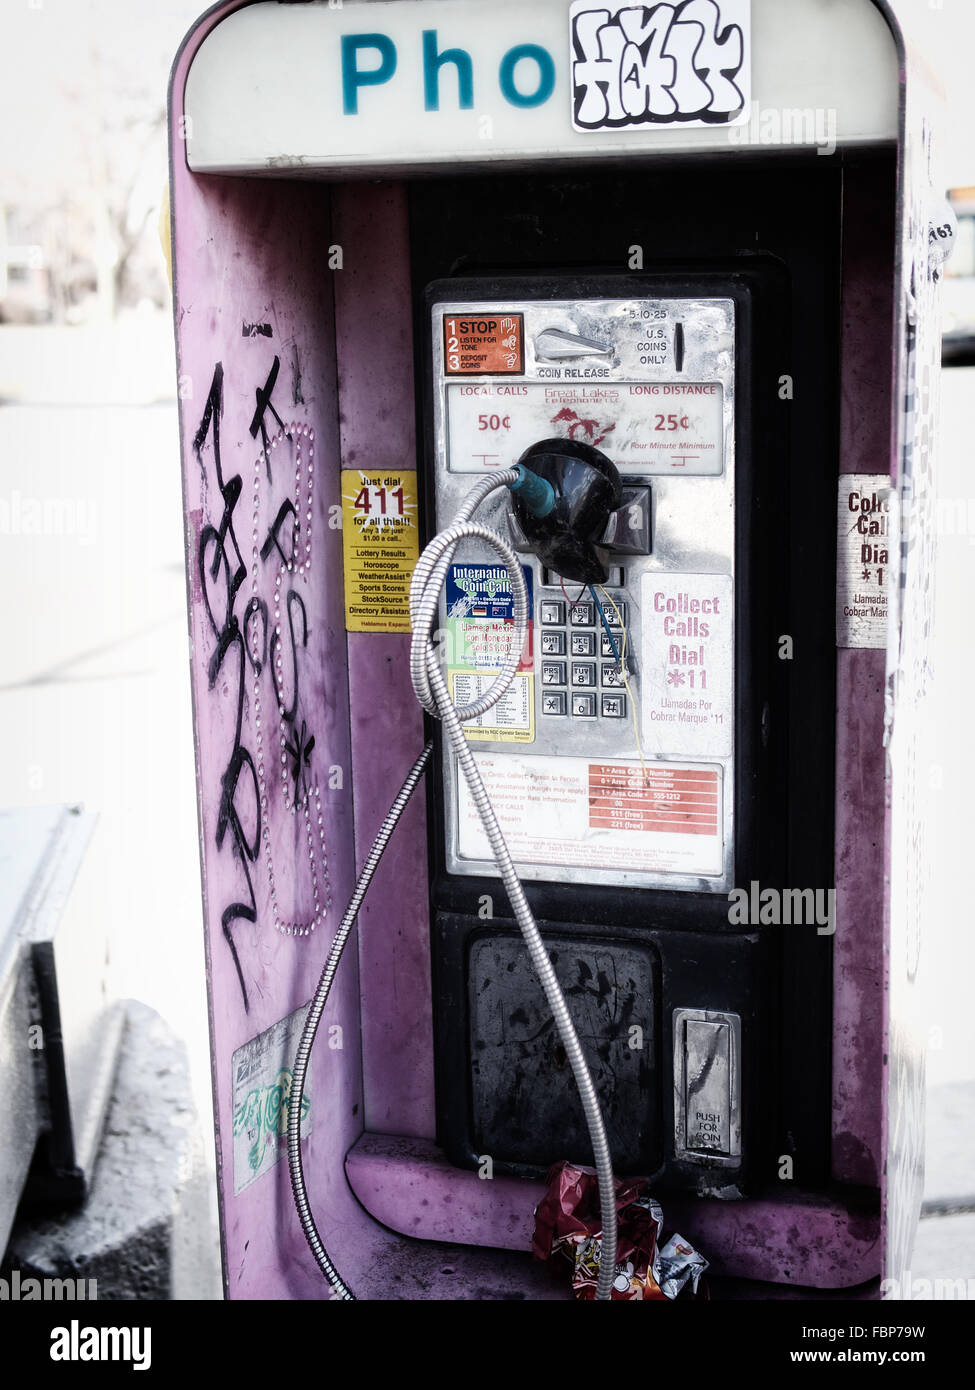 Remains of phone booth in Mexicantown Detroit that has been broken and painted with graffiti Stock Photo